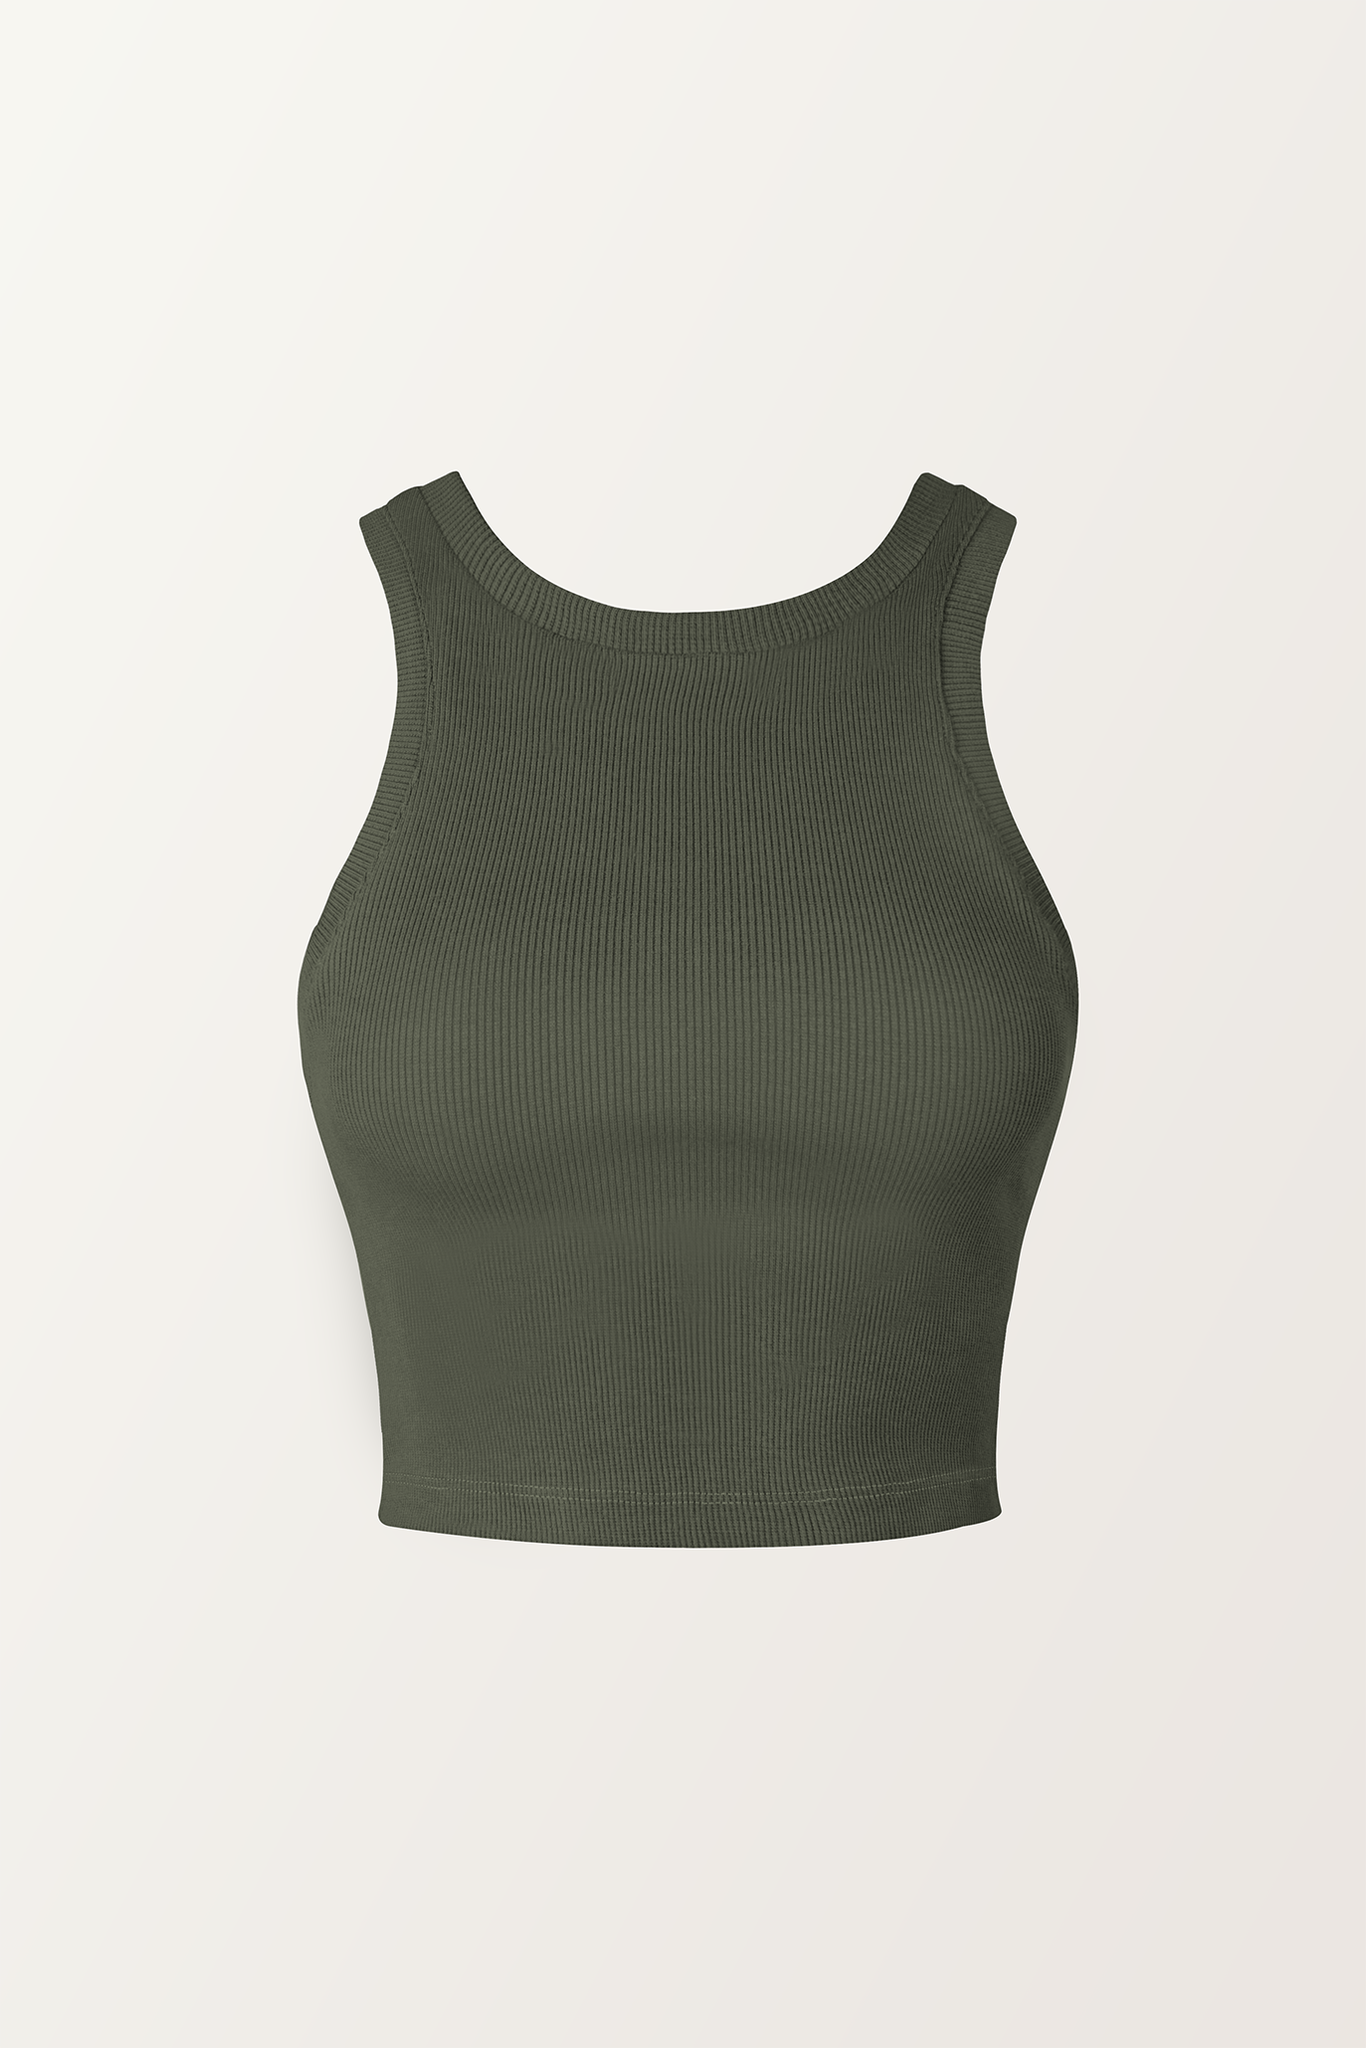 PIXIE WON'T PLAY CROFT CROP TOP RIBBED KHAKI GREEN ORGANIC COTTON SUSTAINABLE FASHION WEAR WITHOUT BRA LUXURY SLEEVELESS STYLISH COMFORTABLE BREATHABLE FABRIC VERSATILE RELAXED FIT SOFT TRENDY SUMMER AUTUMN WINTER SPRING WEAR CASUAL OUTFIT WORKOUT LAYERING VARIOUS COLORS FASHIONABLE MUST-HAVE 